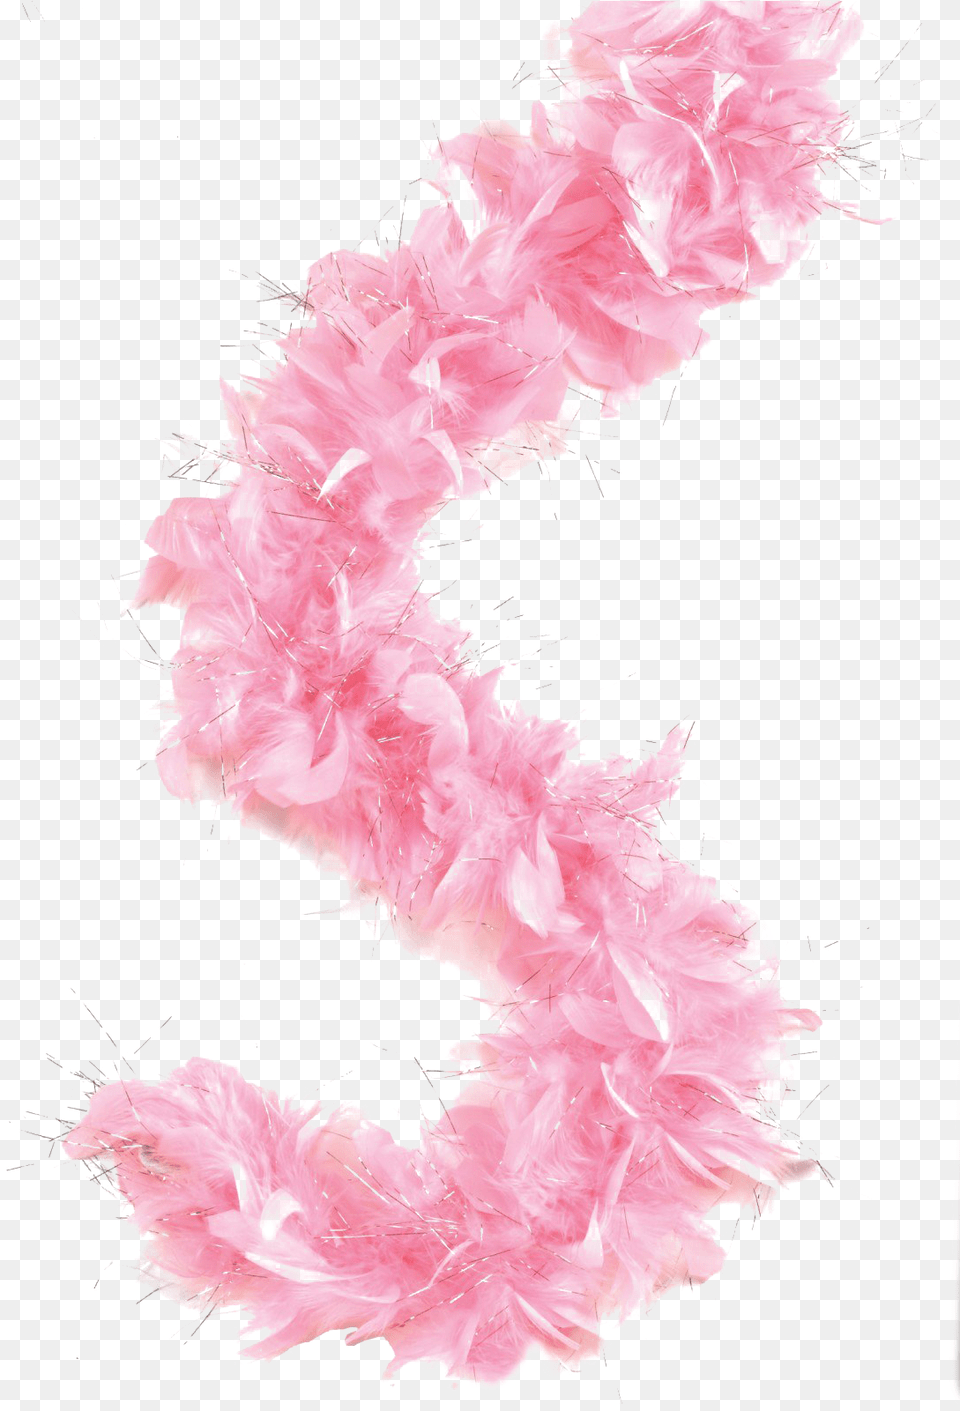 Feather Boa Picture Feather Boa, Accessories, Person, Feather Boa Png